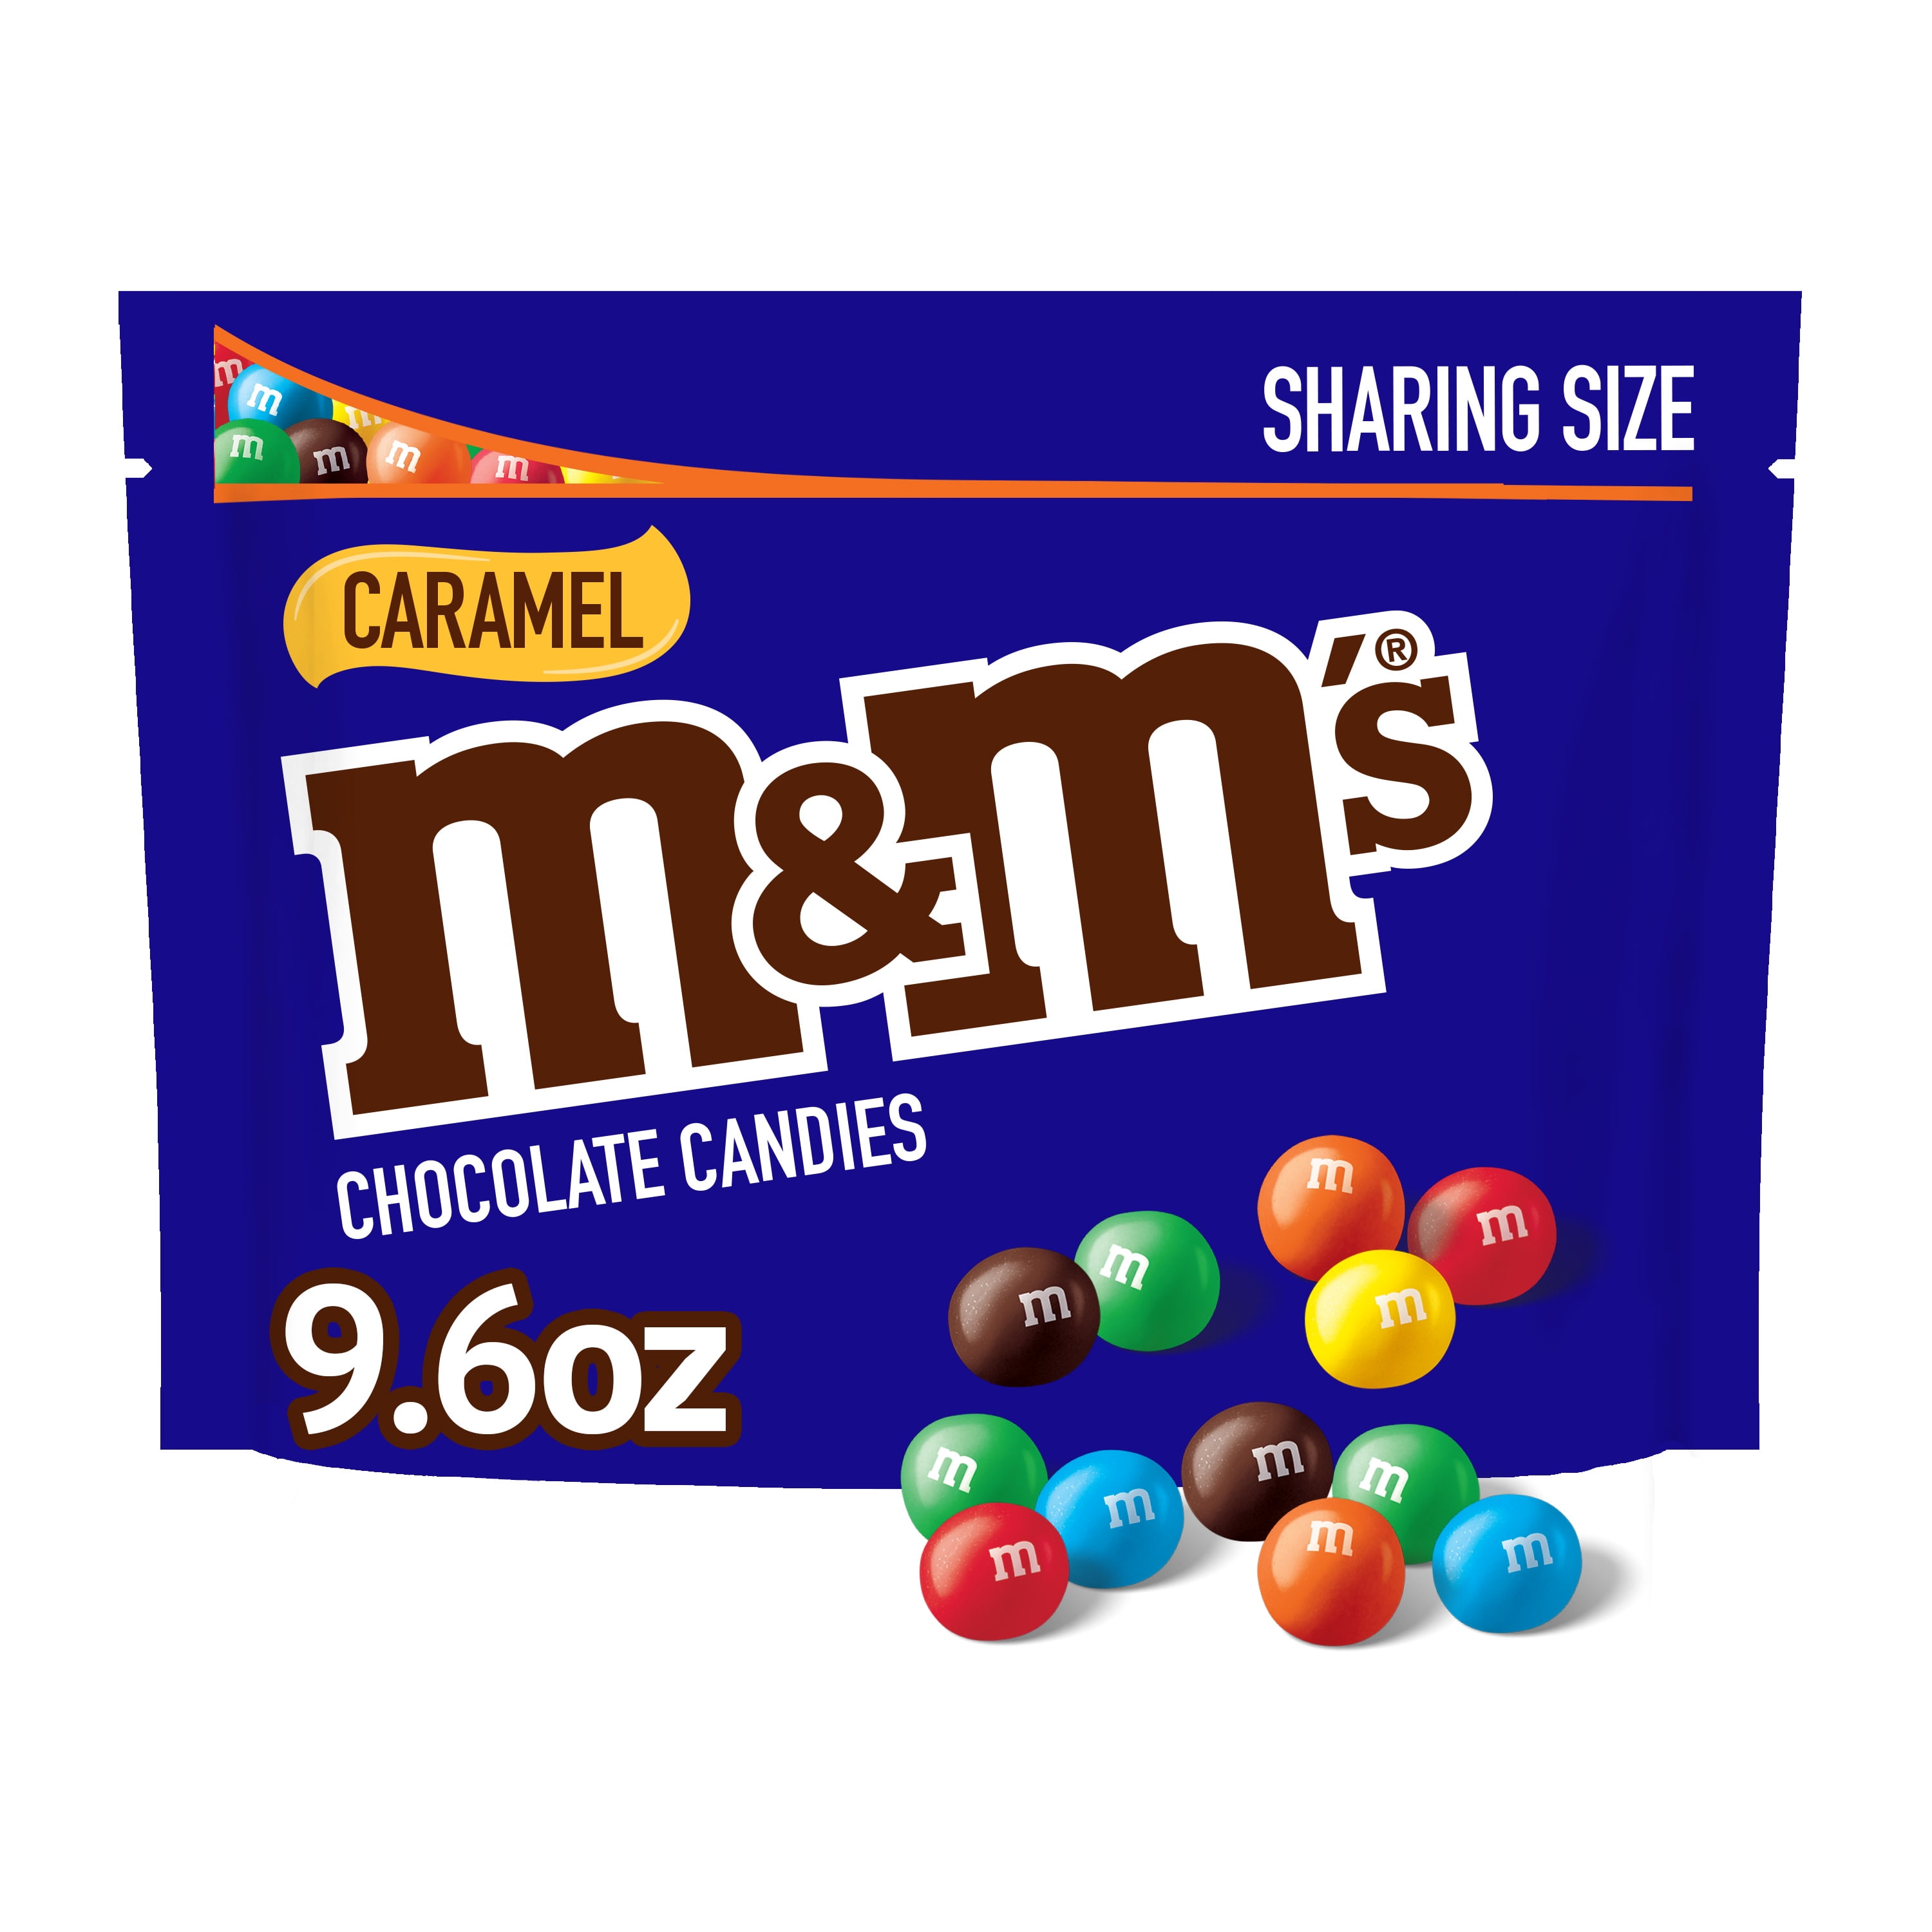  M&M'S Caramel Chocolate Candy Share Size 2.83-Ounce Pouch  24-Count Box : Everything Else